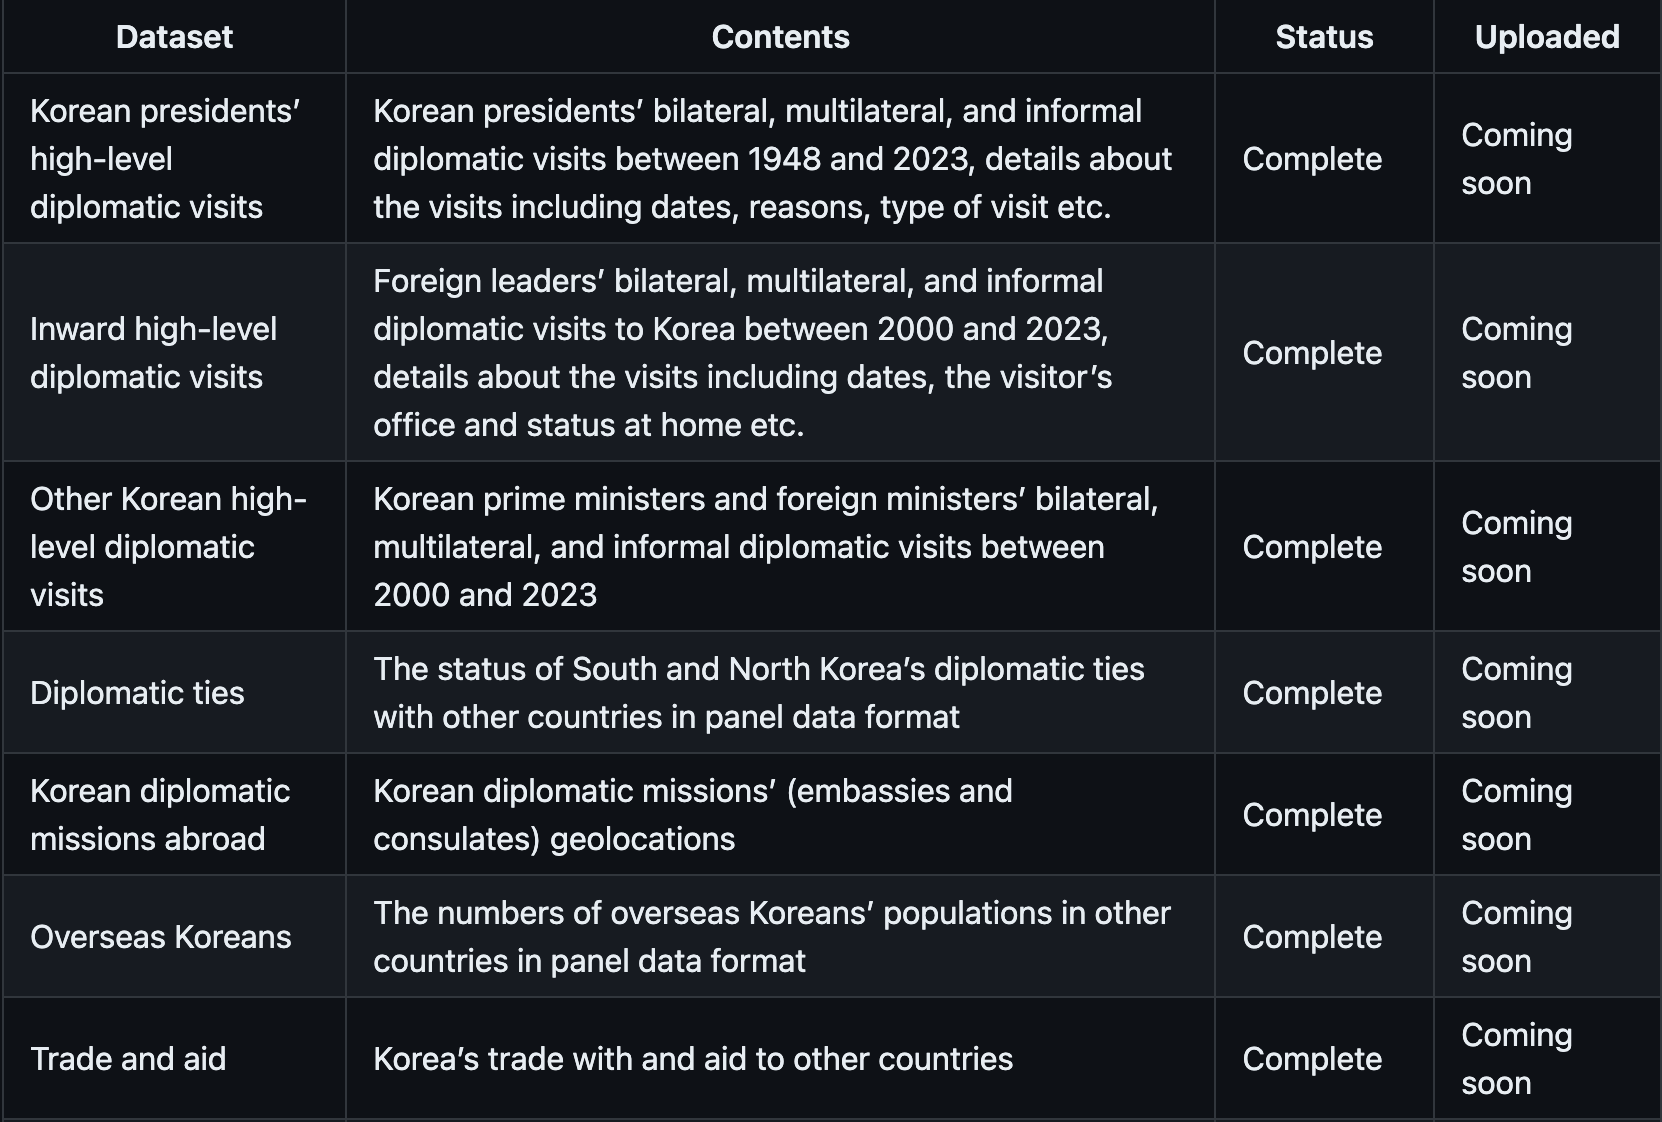 `kdiplo`: A One-Stop Public Repository for Datasets on Korean Diplomacy